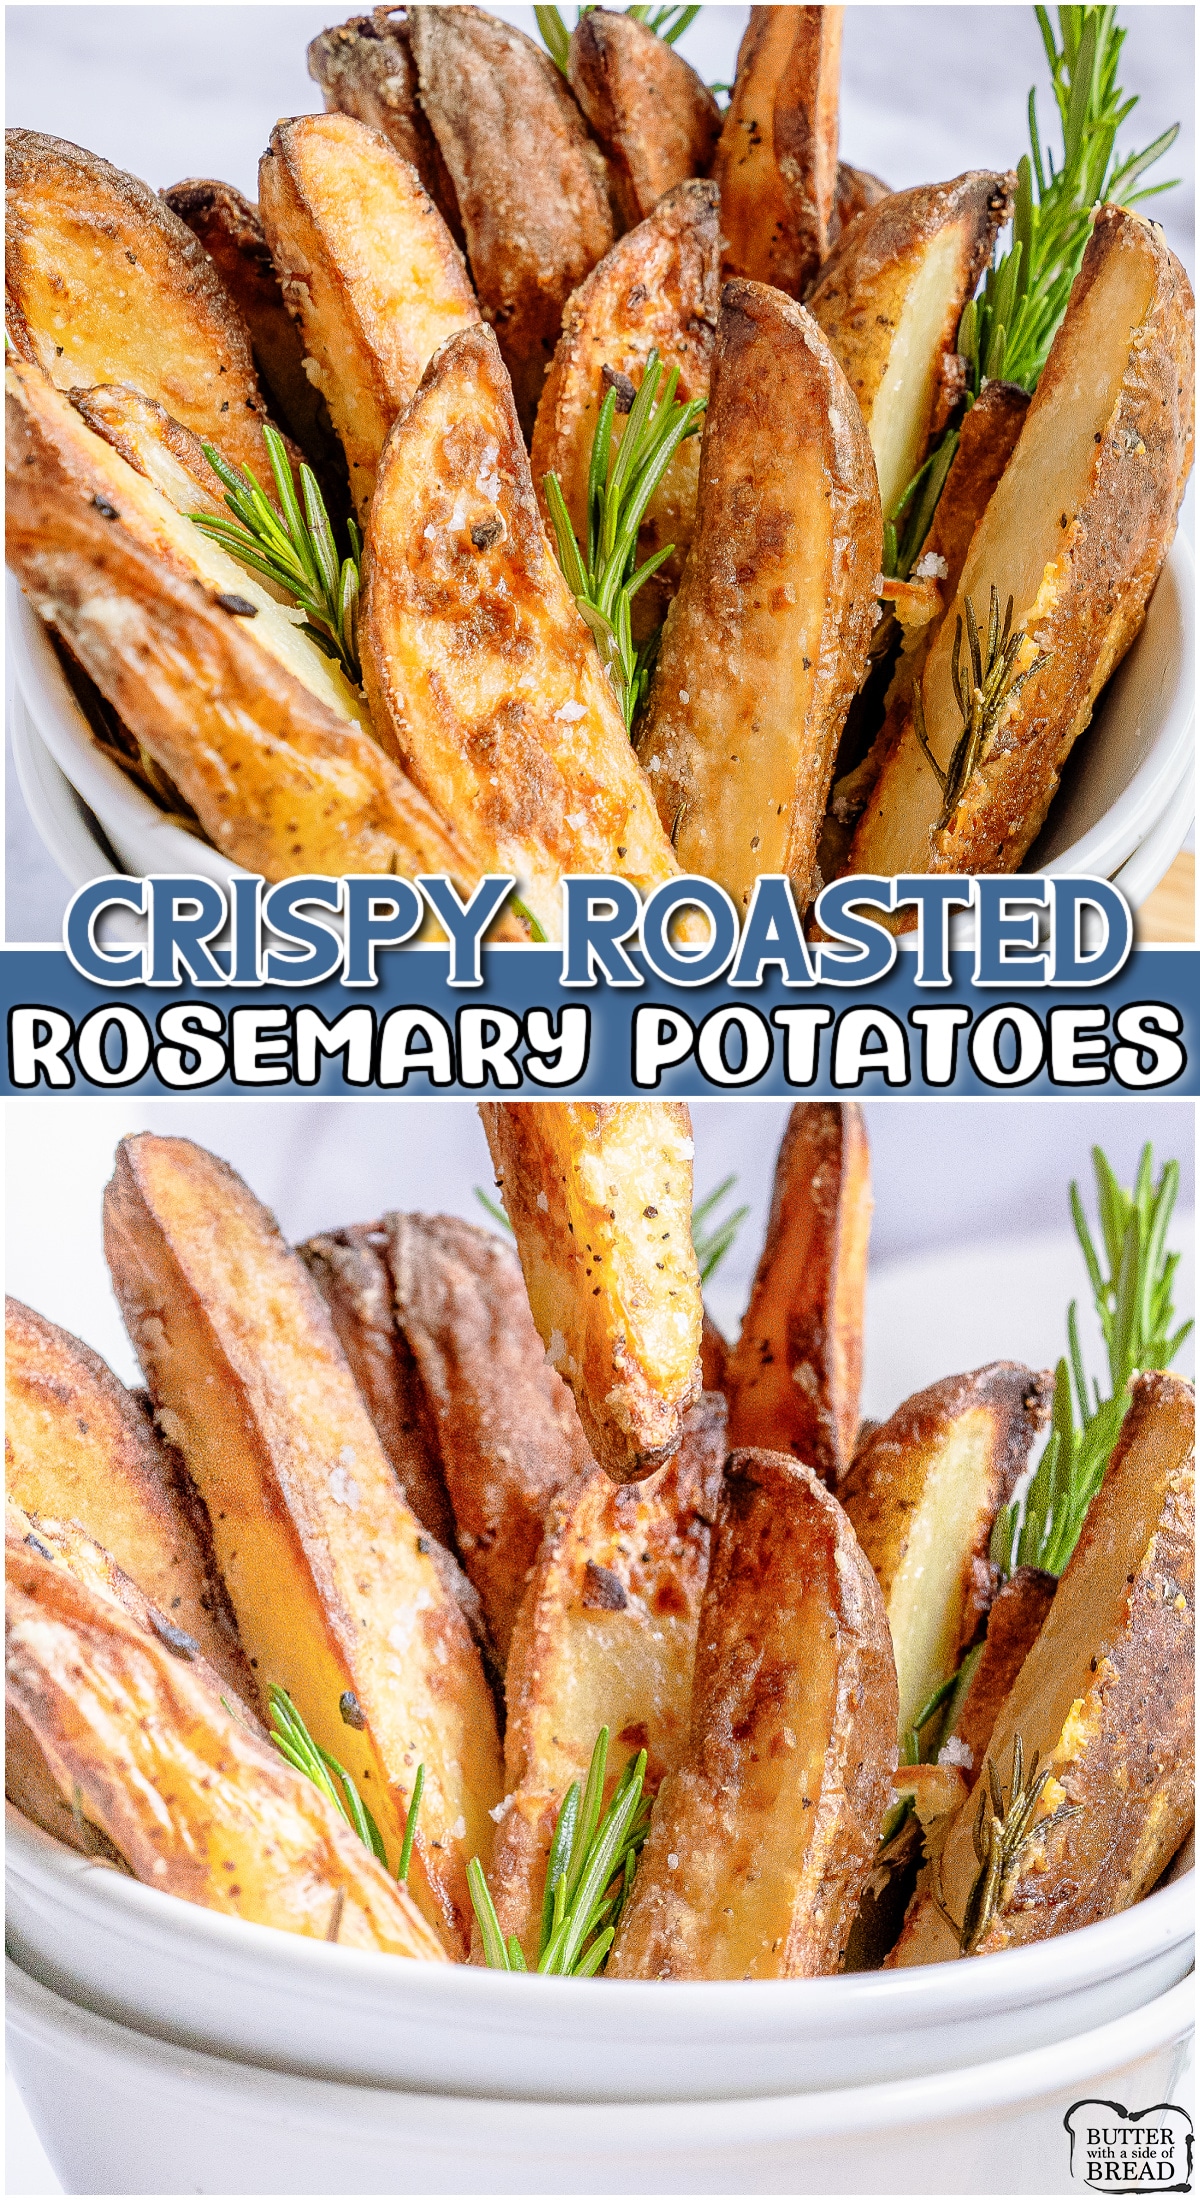 Crispy Roasted Rosemary Potatoes made with simple ingredients & are the perfect potato side dish!  These rosemary garlic potatoes are delicious and so easy to make in minutes!